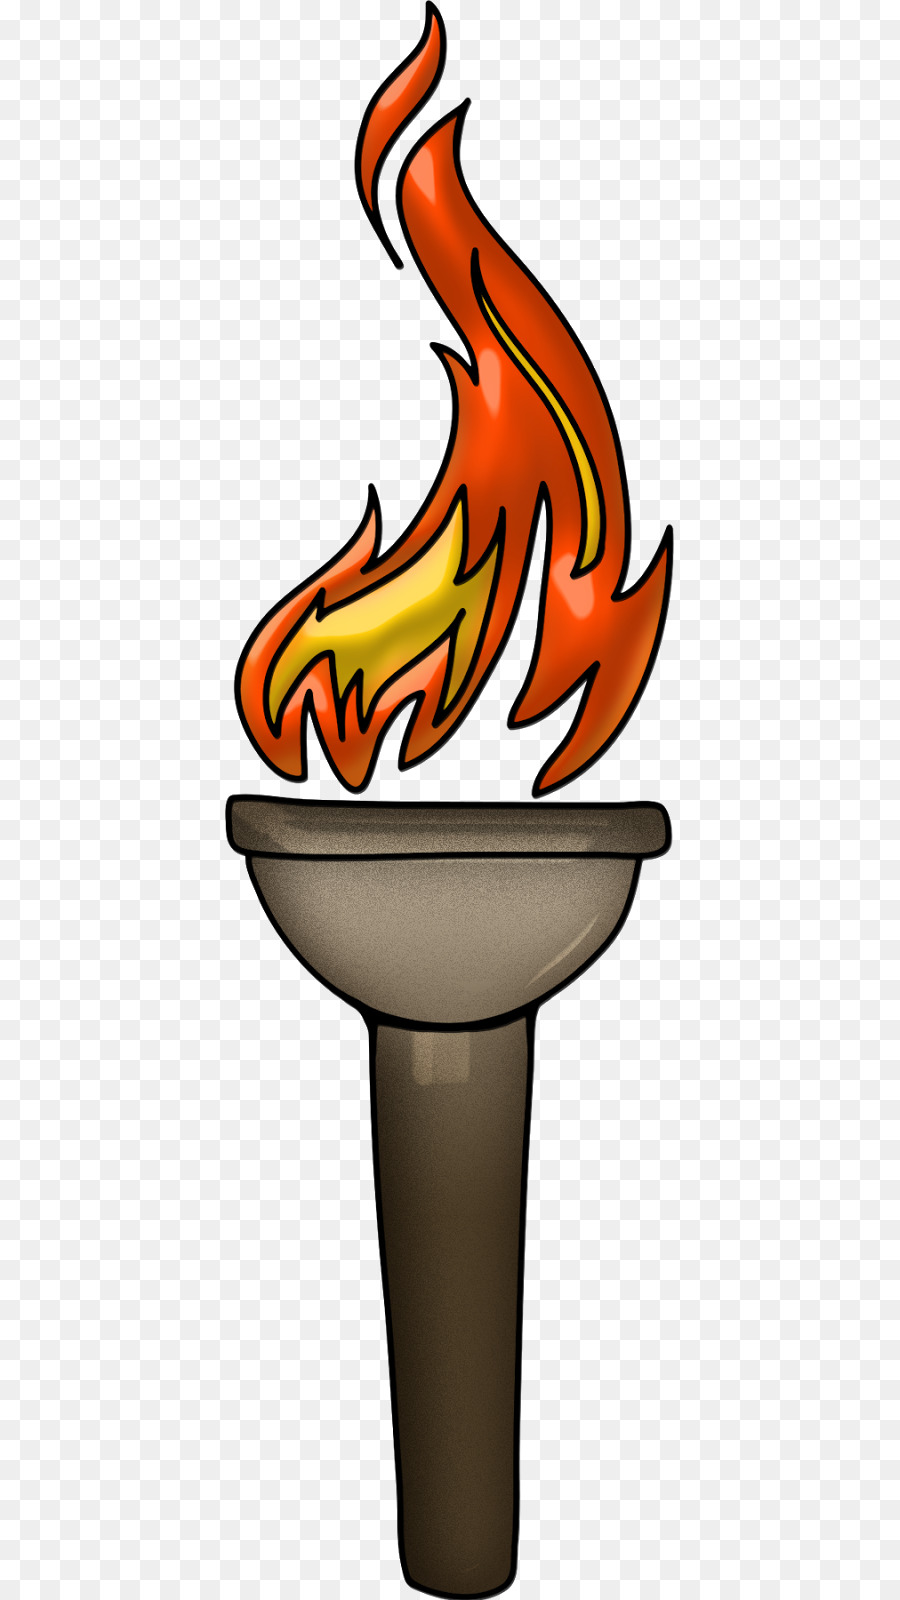 Jeux Olympiques Torche Flamme Olympique Png Jeux Olympiques Torche